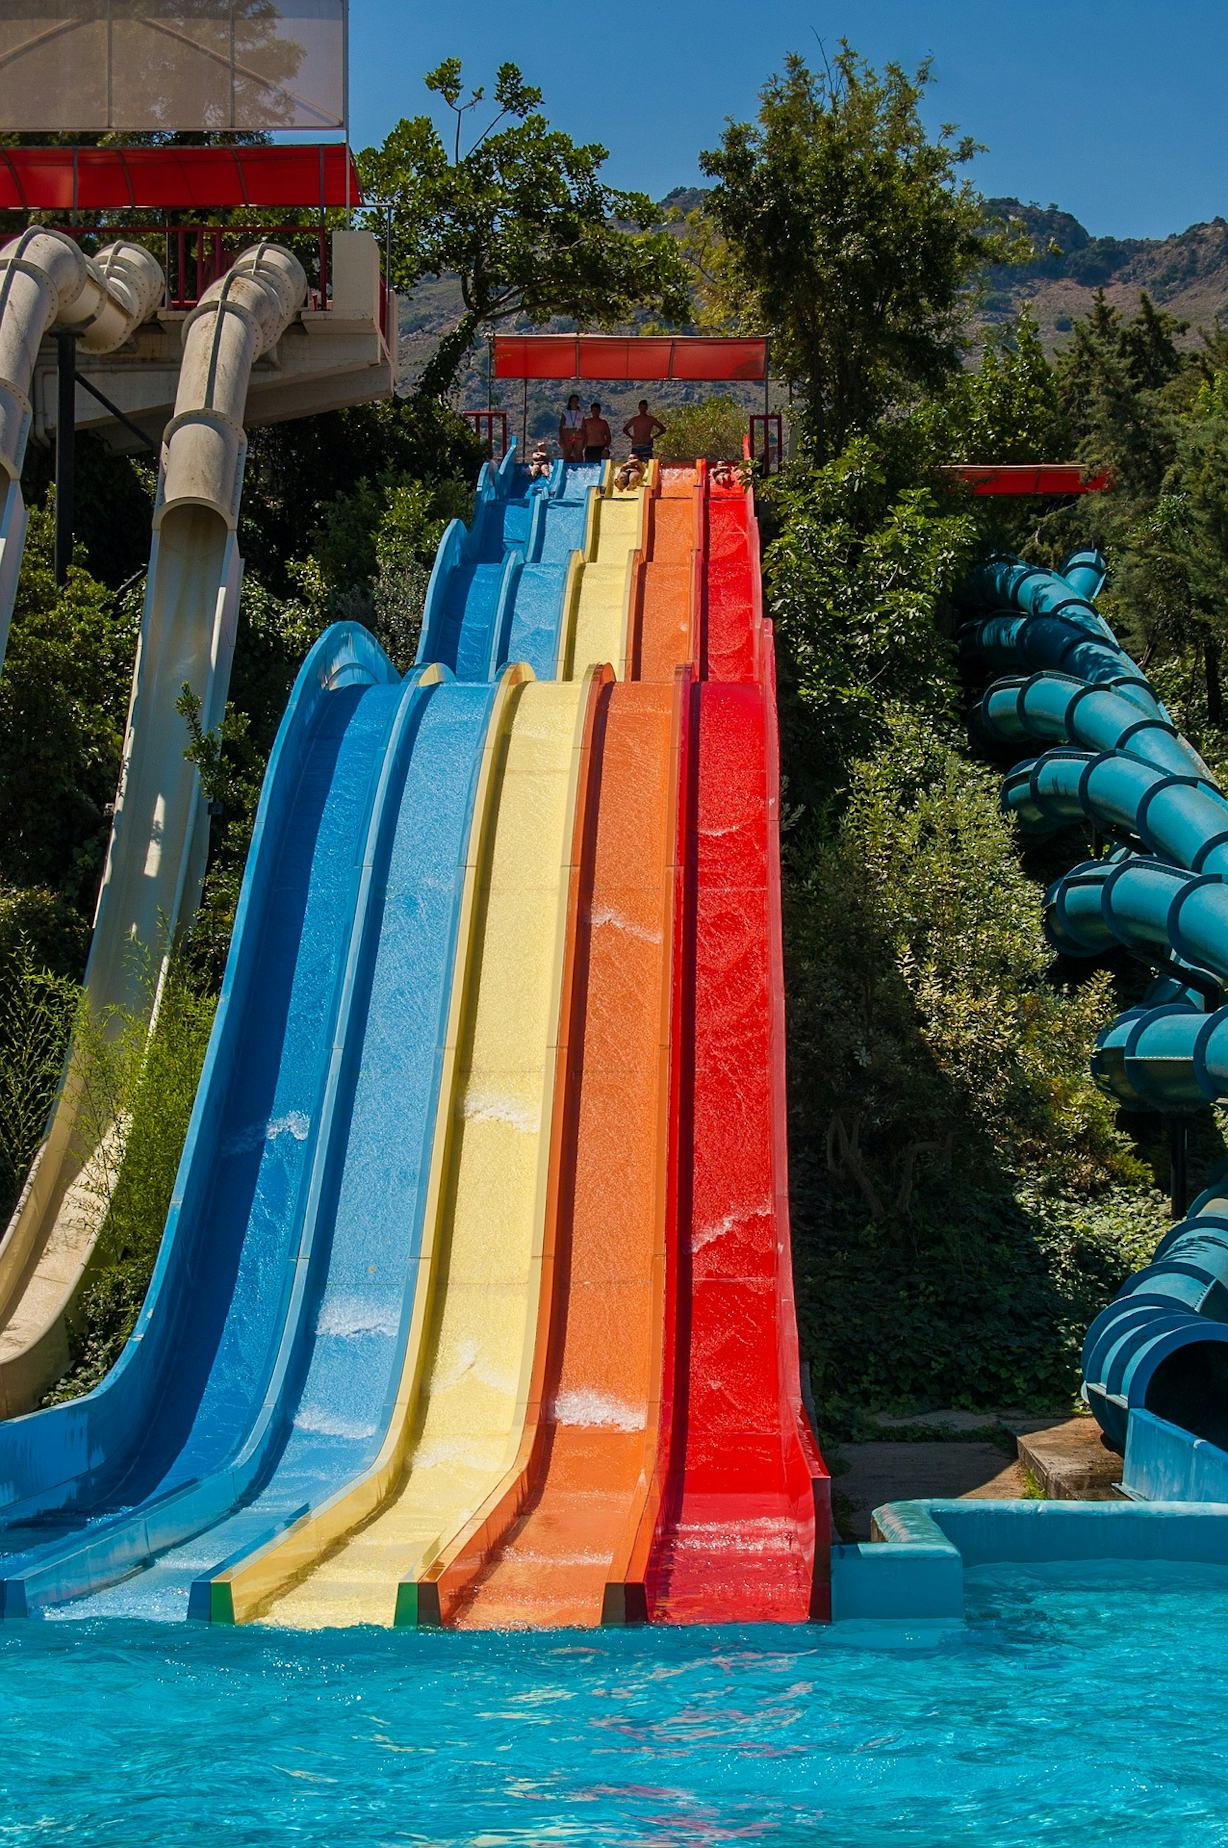 Can You Go Down A Water Slide If You’re Pregnant? Experts Weigh In